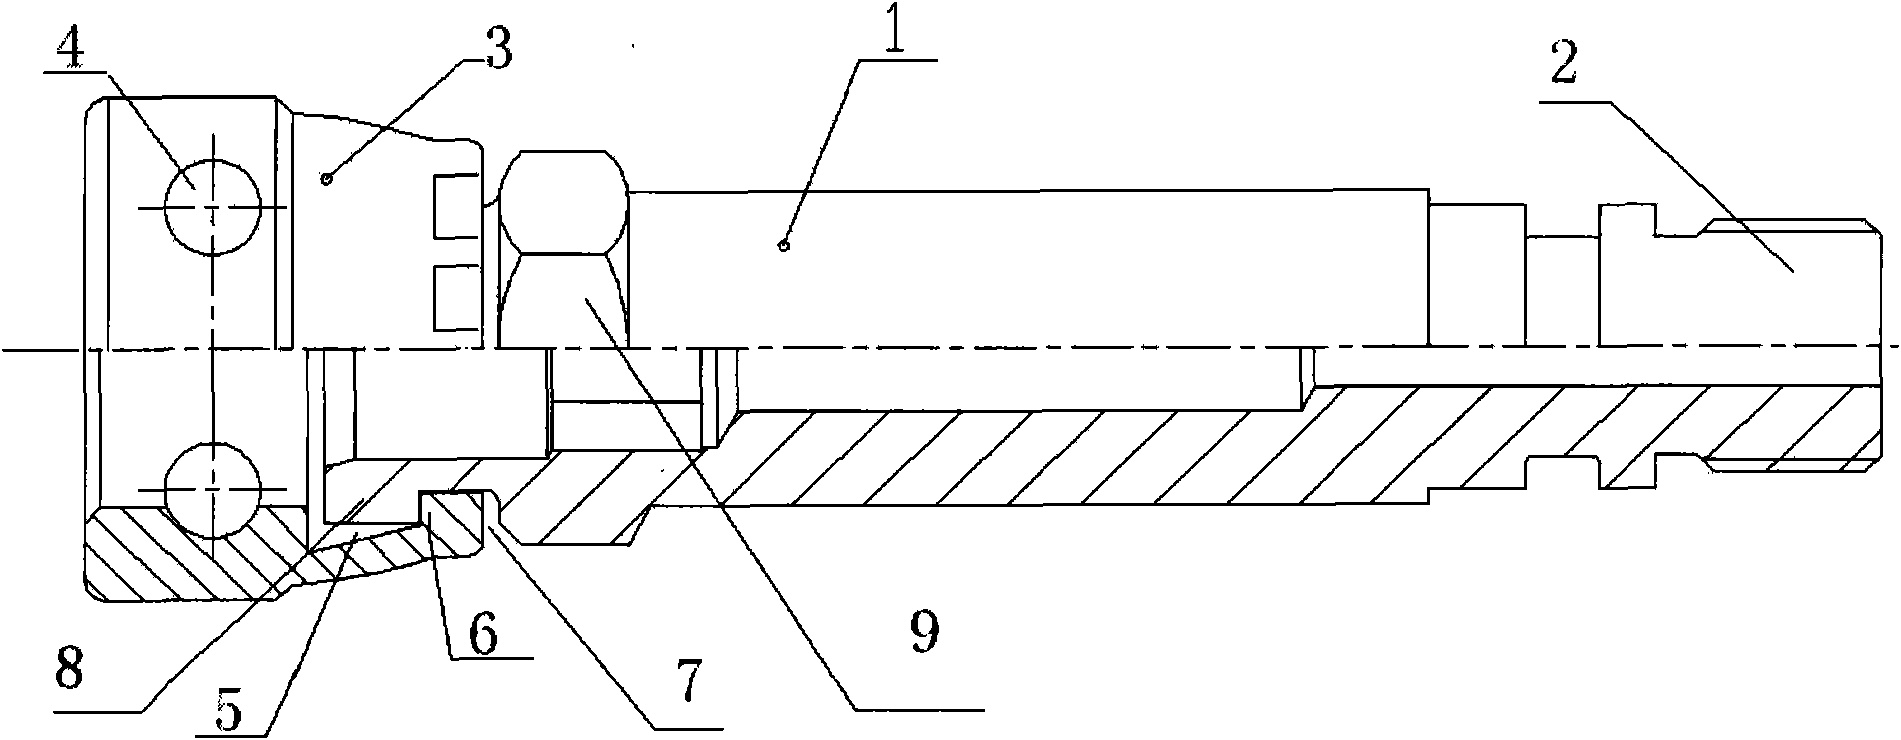 Transitional joint of pipe body